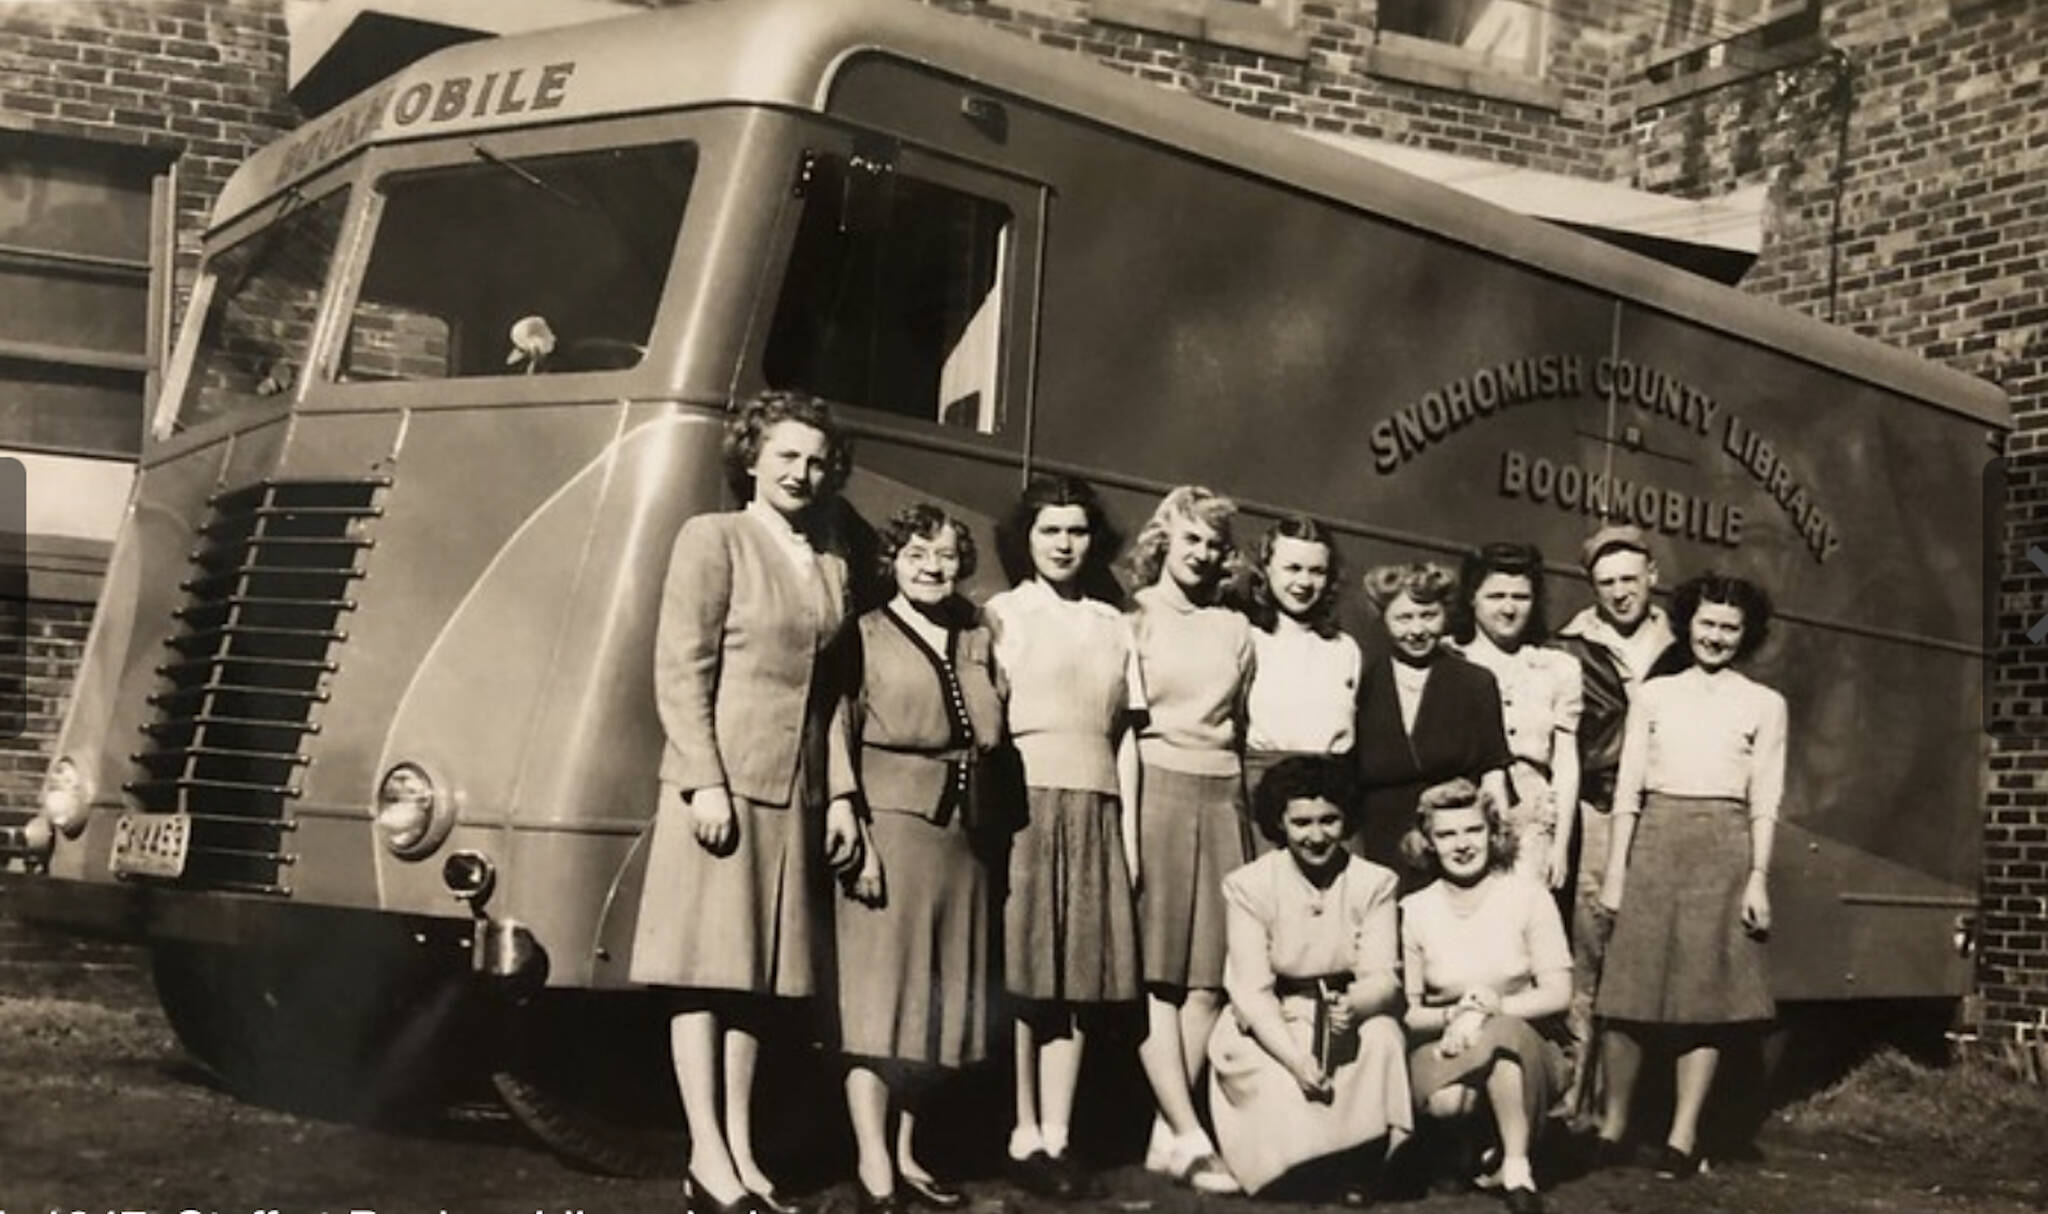 The original, 1948 bookmobile served rural communities. (Photo provided)